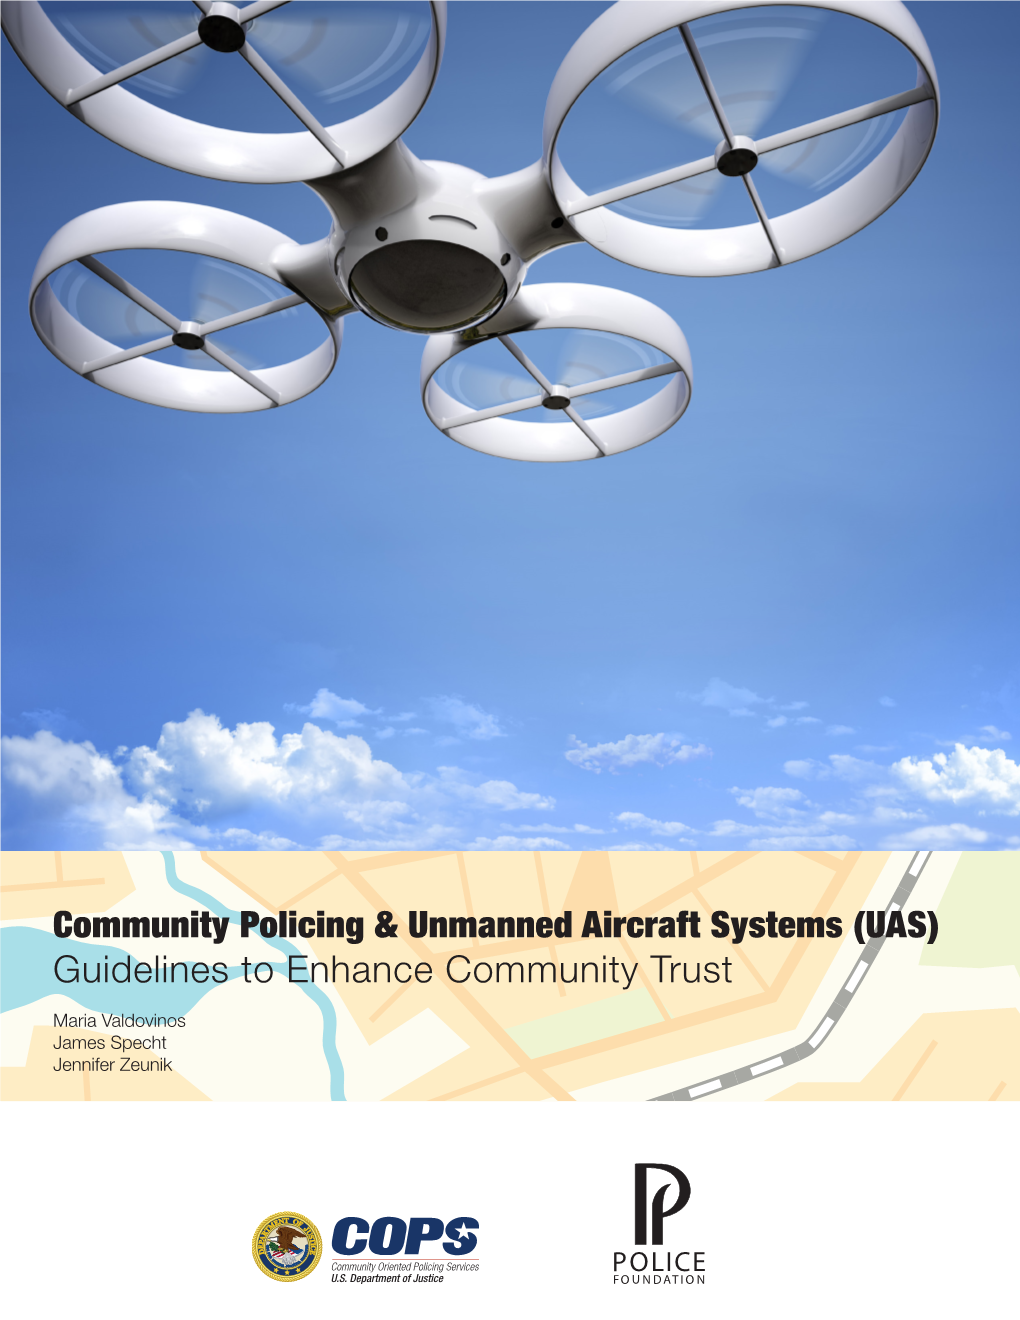 Law Enforcement & Unmanned Aircraft Systems